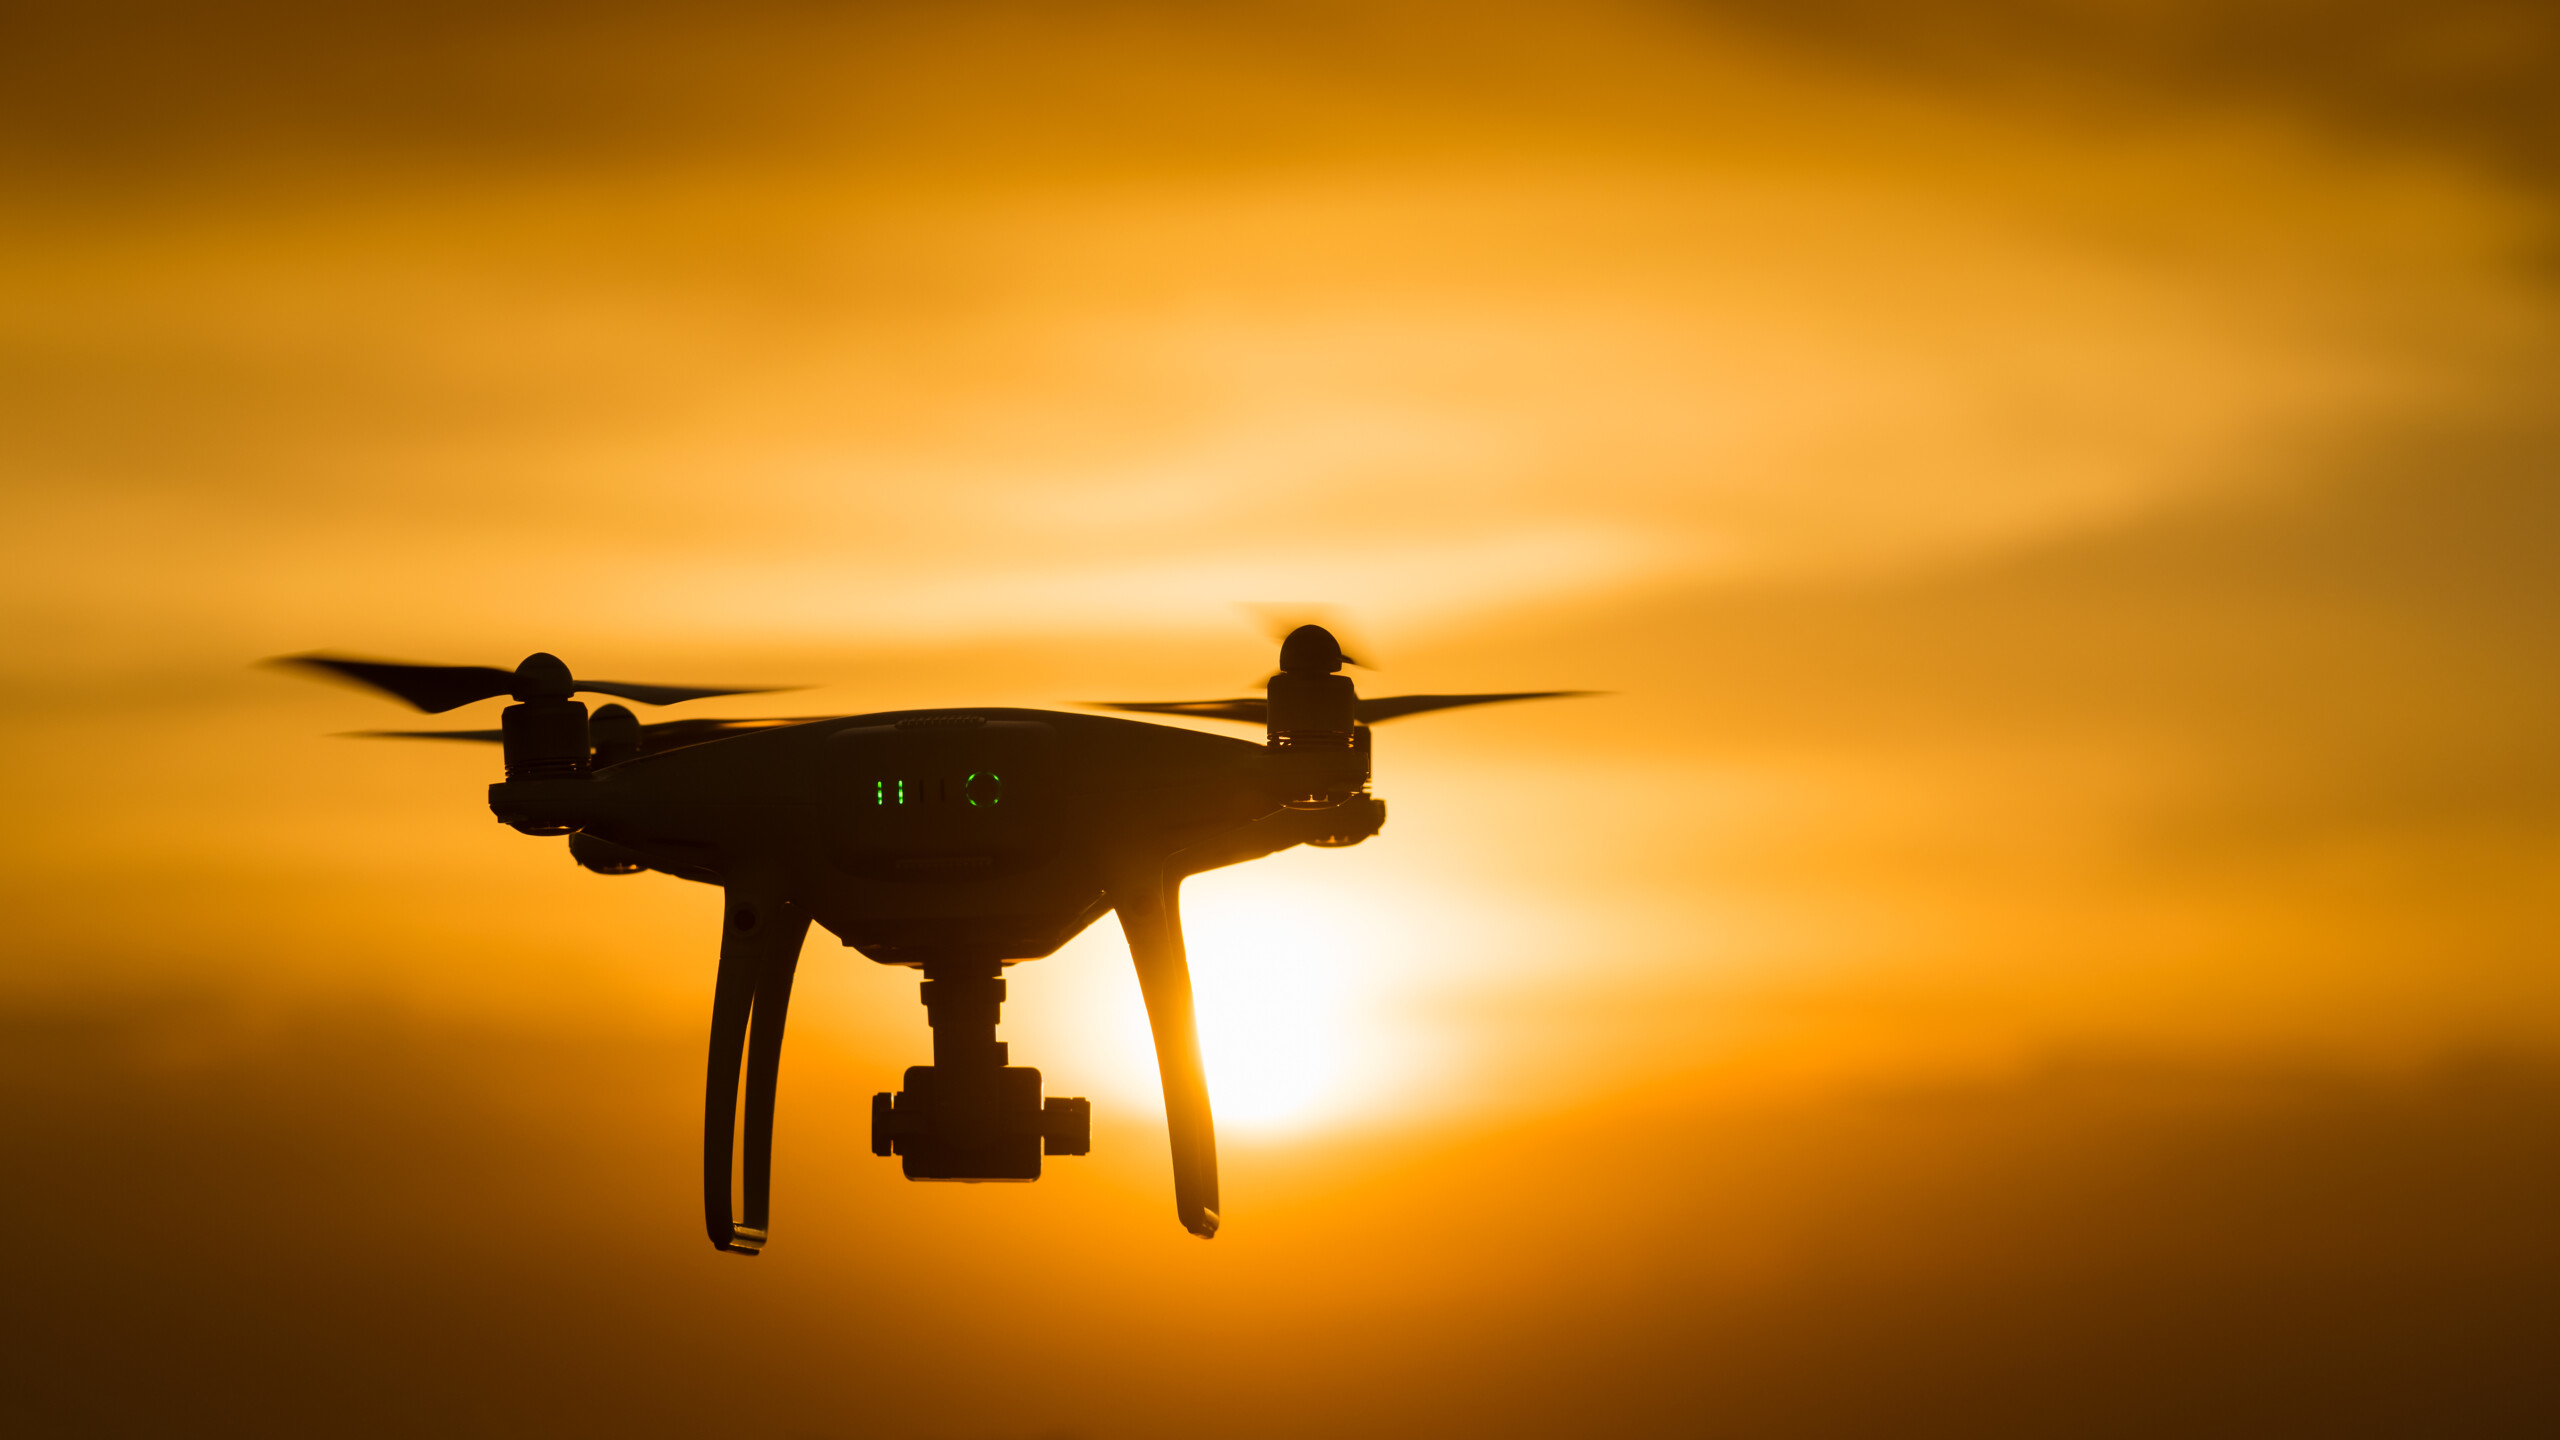 Why Real Estate Agents Need to Use Drones in Marketing